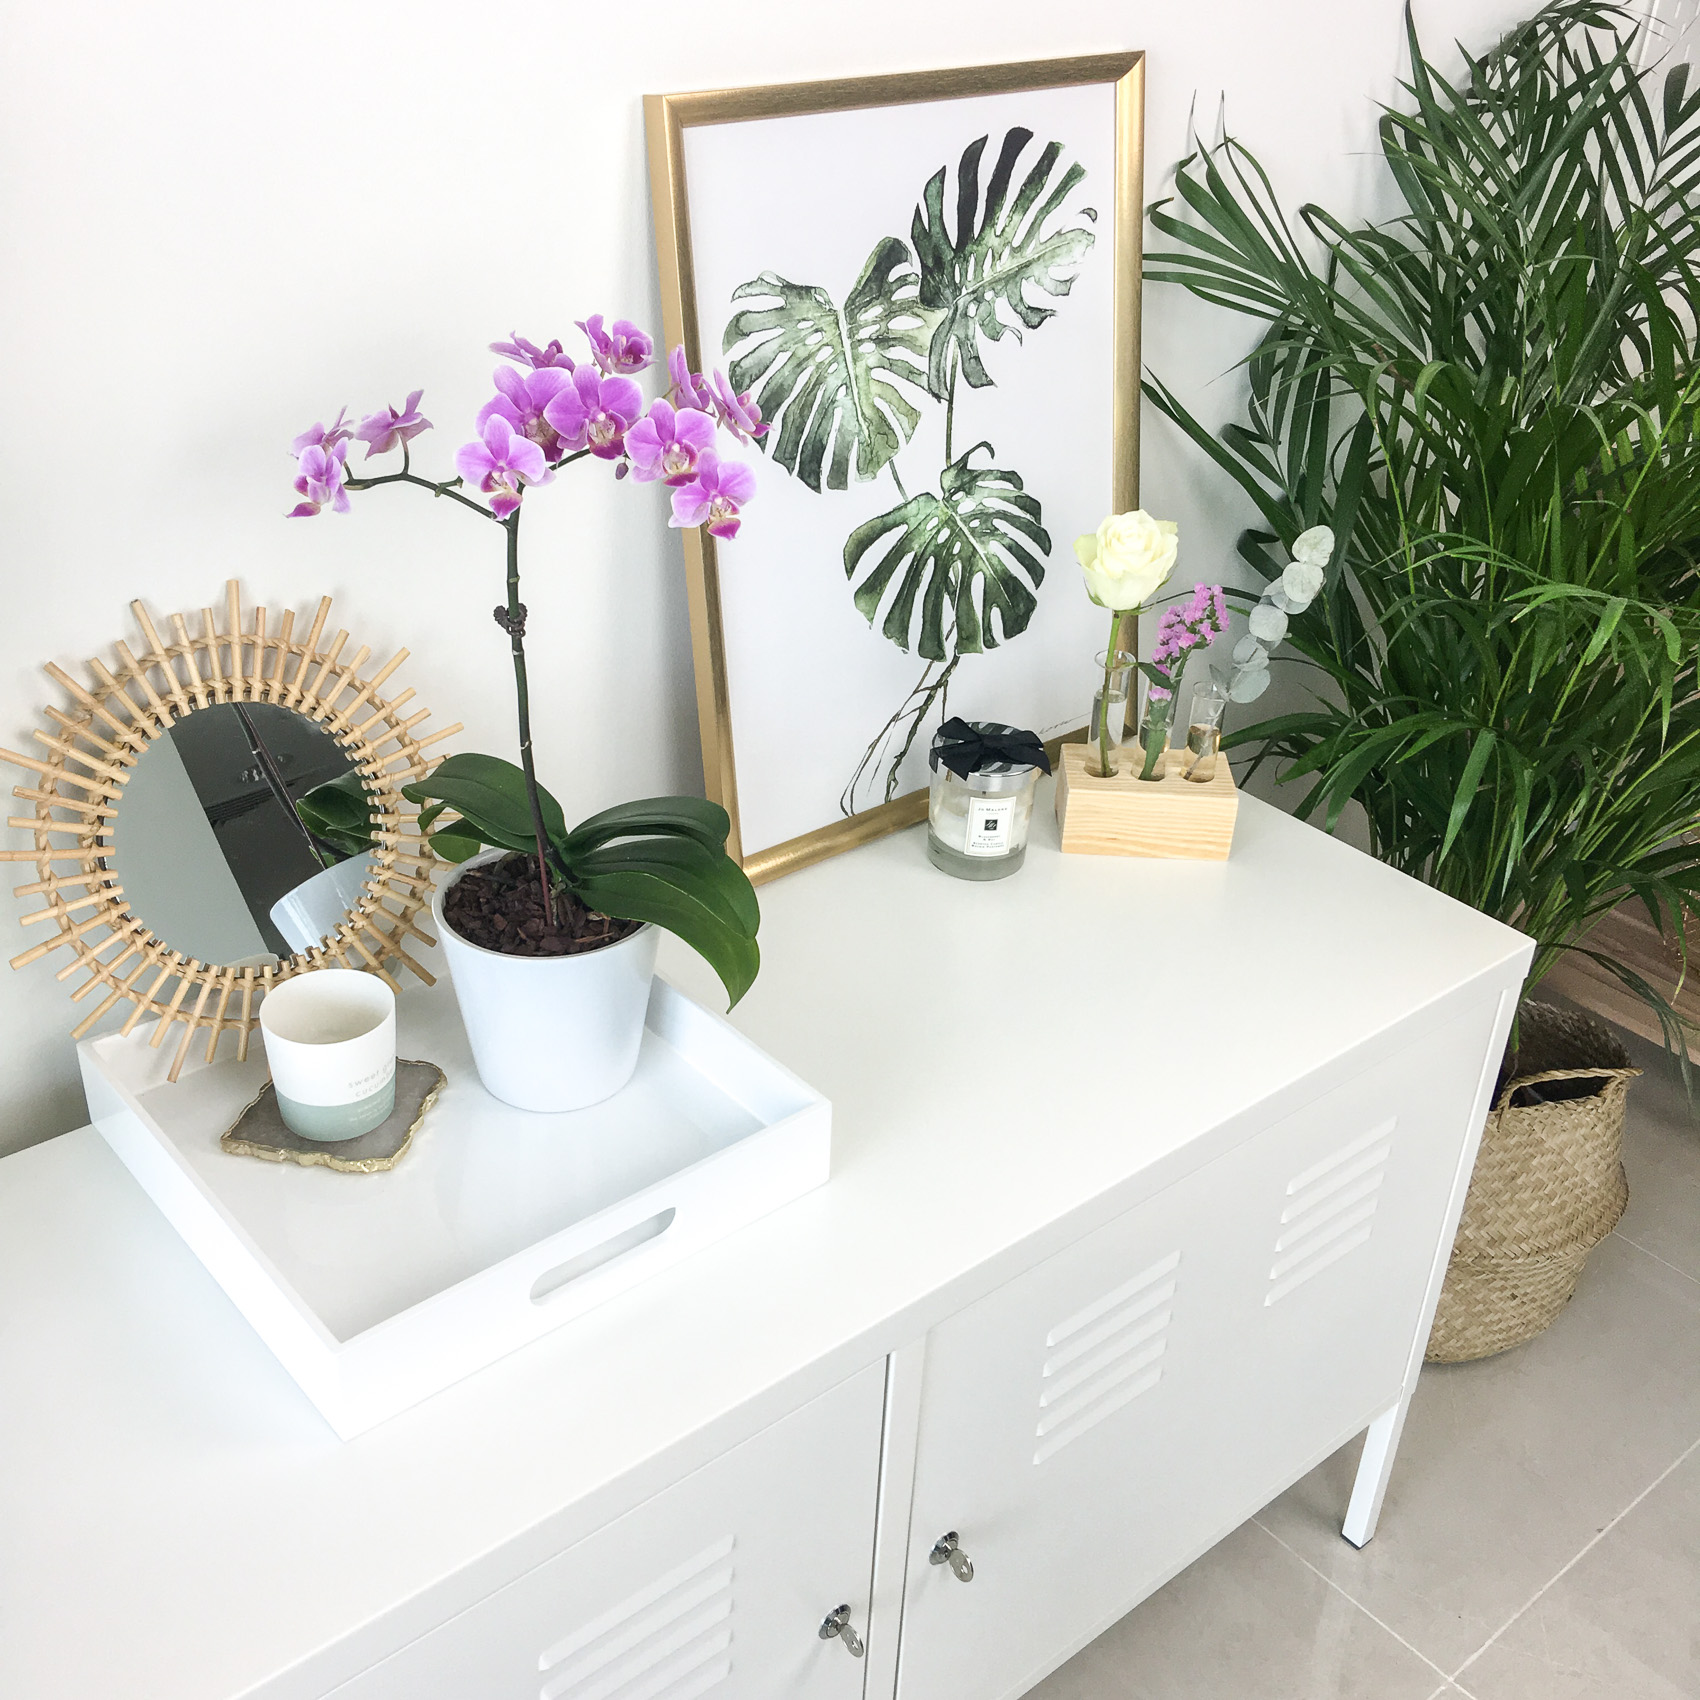 IKEA PS Cabinet, Table, Plants, Living Room Decor, TV Unit, Rattan Mirror, Ikea Nymo Lamp Shade, Maisons DuMonde,West Elm Acrylic Tray, Orchid, Living Room Decore, Interior, Jo Malone, Candle